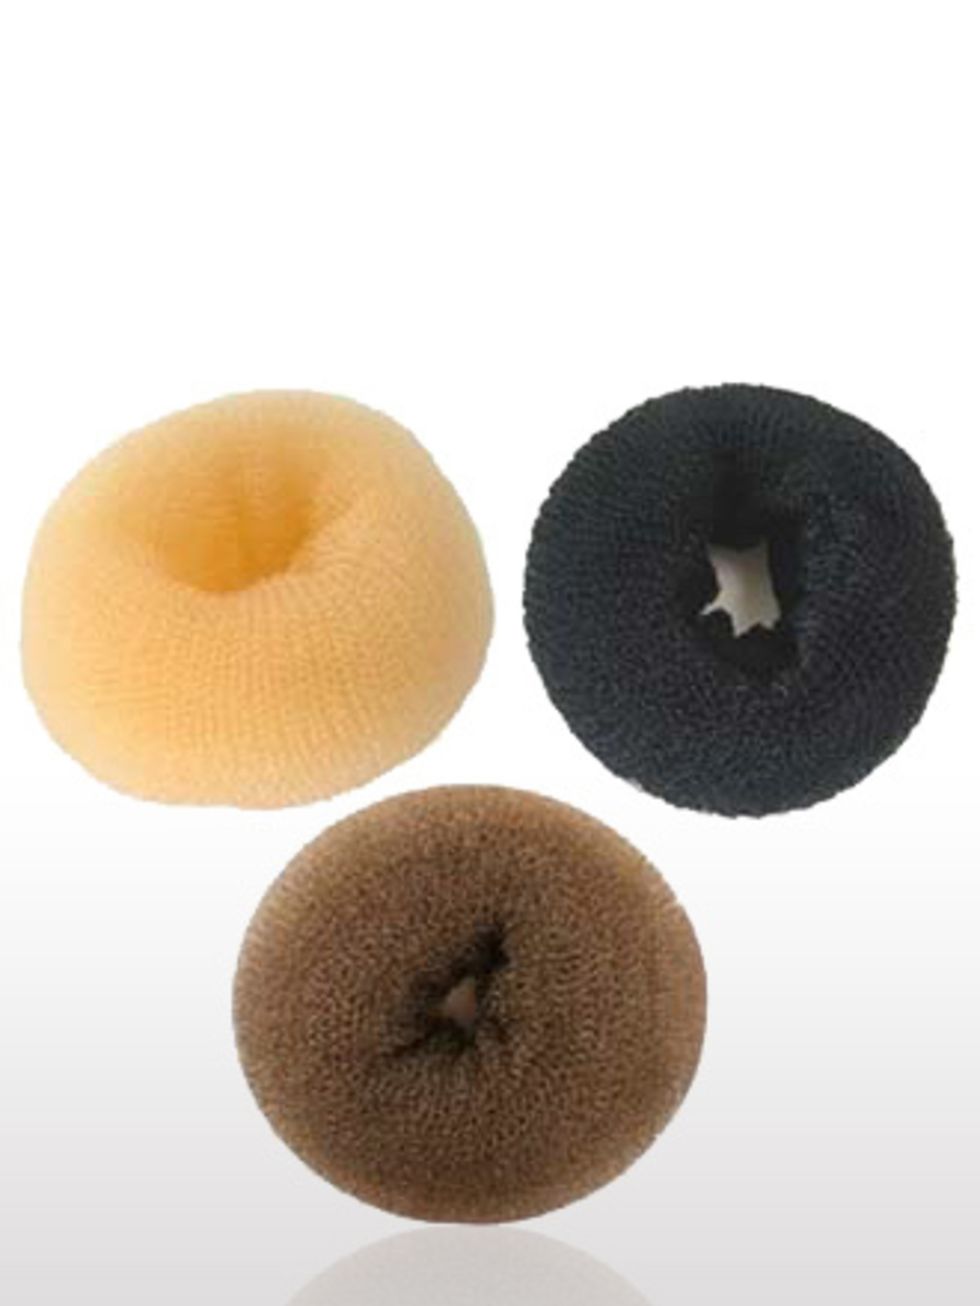 <p>Whether you want a dolly bun, or just more body in the crown, a donut should be your new best friend. They work as the sturdiest base for updos ever.</p><p>Hair Donuts, £1.99 by <a href="http://www.pretty-pieces.co.uk/Hair-Donut-p/s08thanc11.htm">Prett